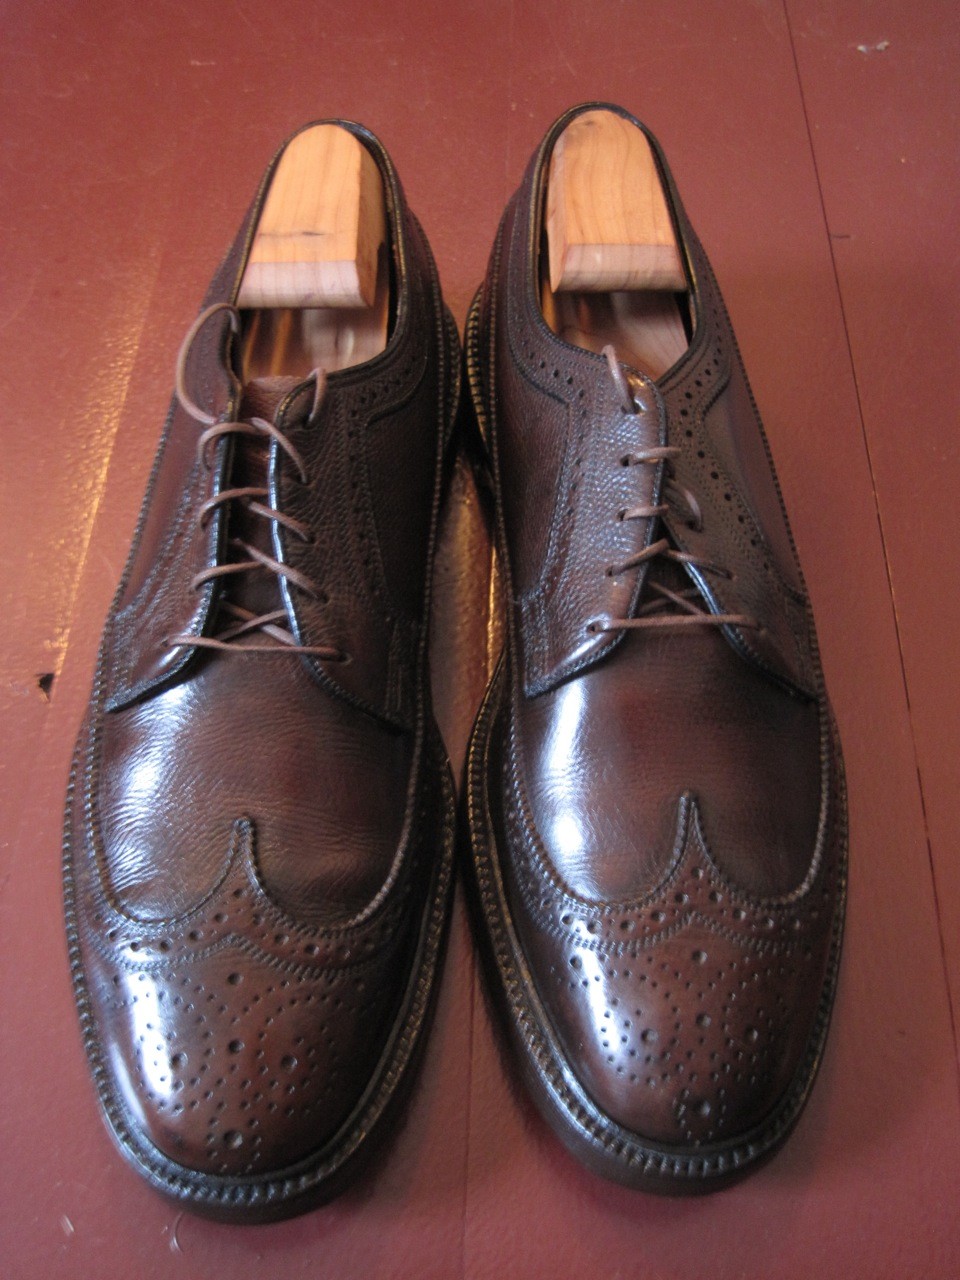 My Florsheim Imperials with locally replaced V-cleat heels. | Styleforum